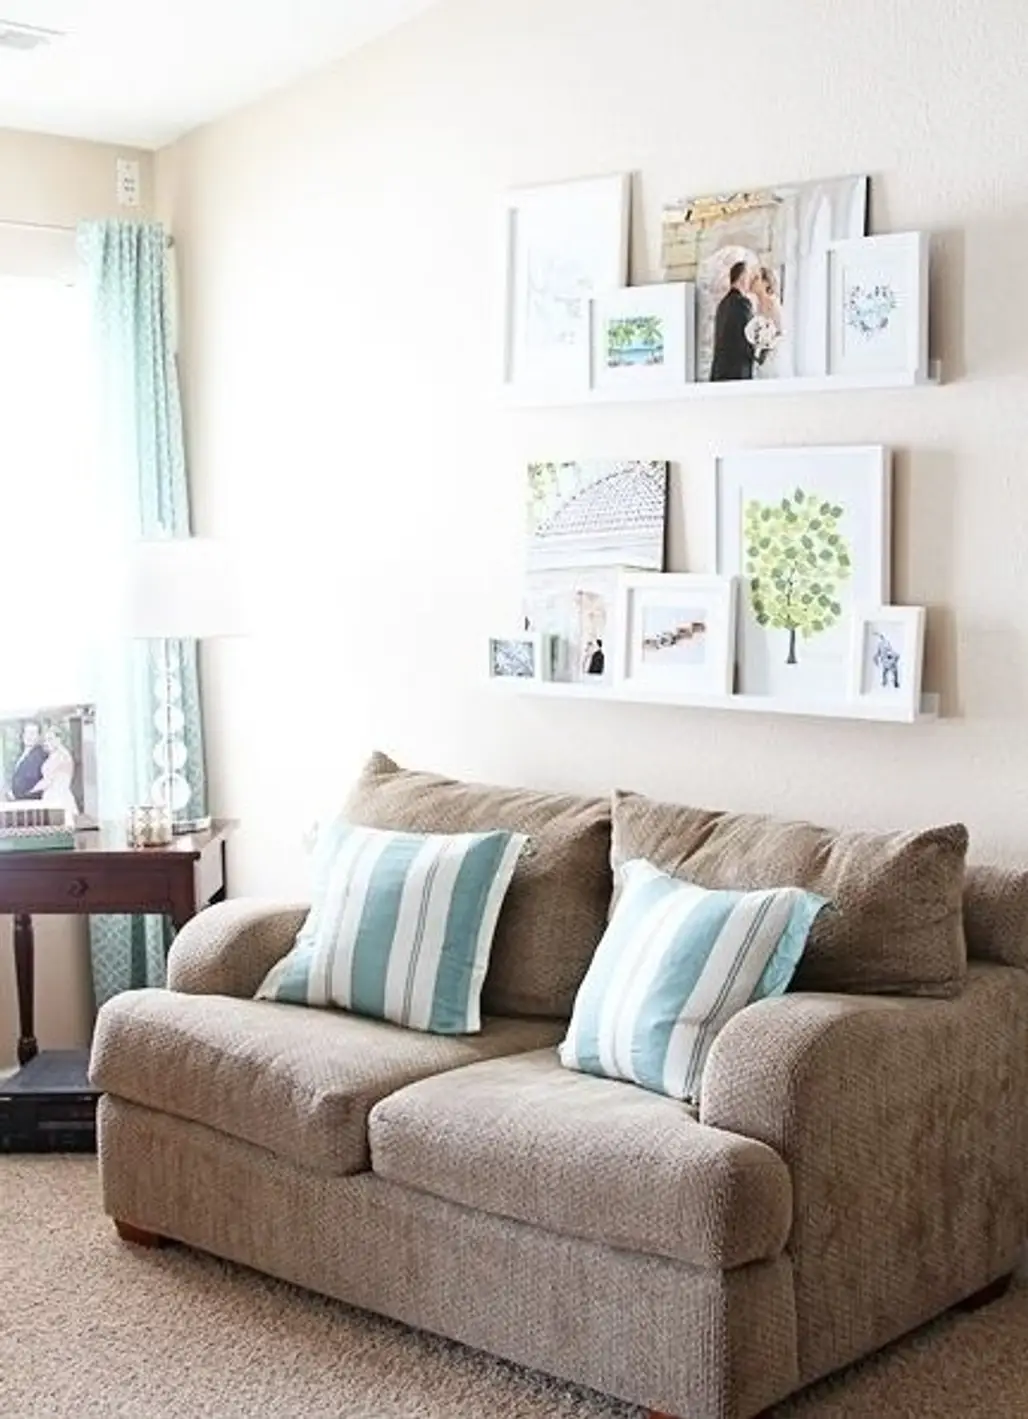 Choosing the Wrong Picture Size for above Your Sofa